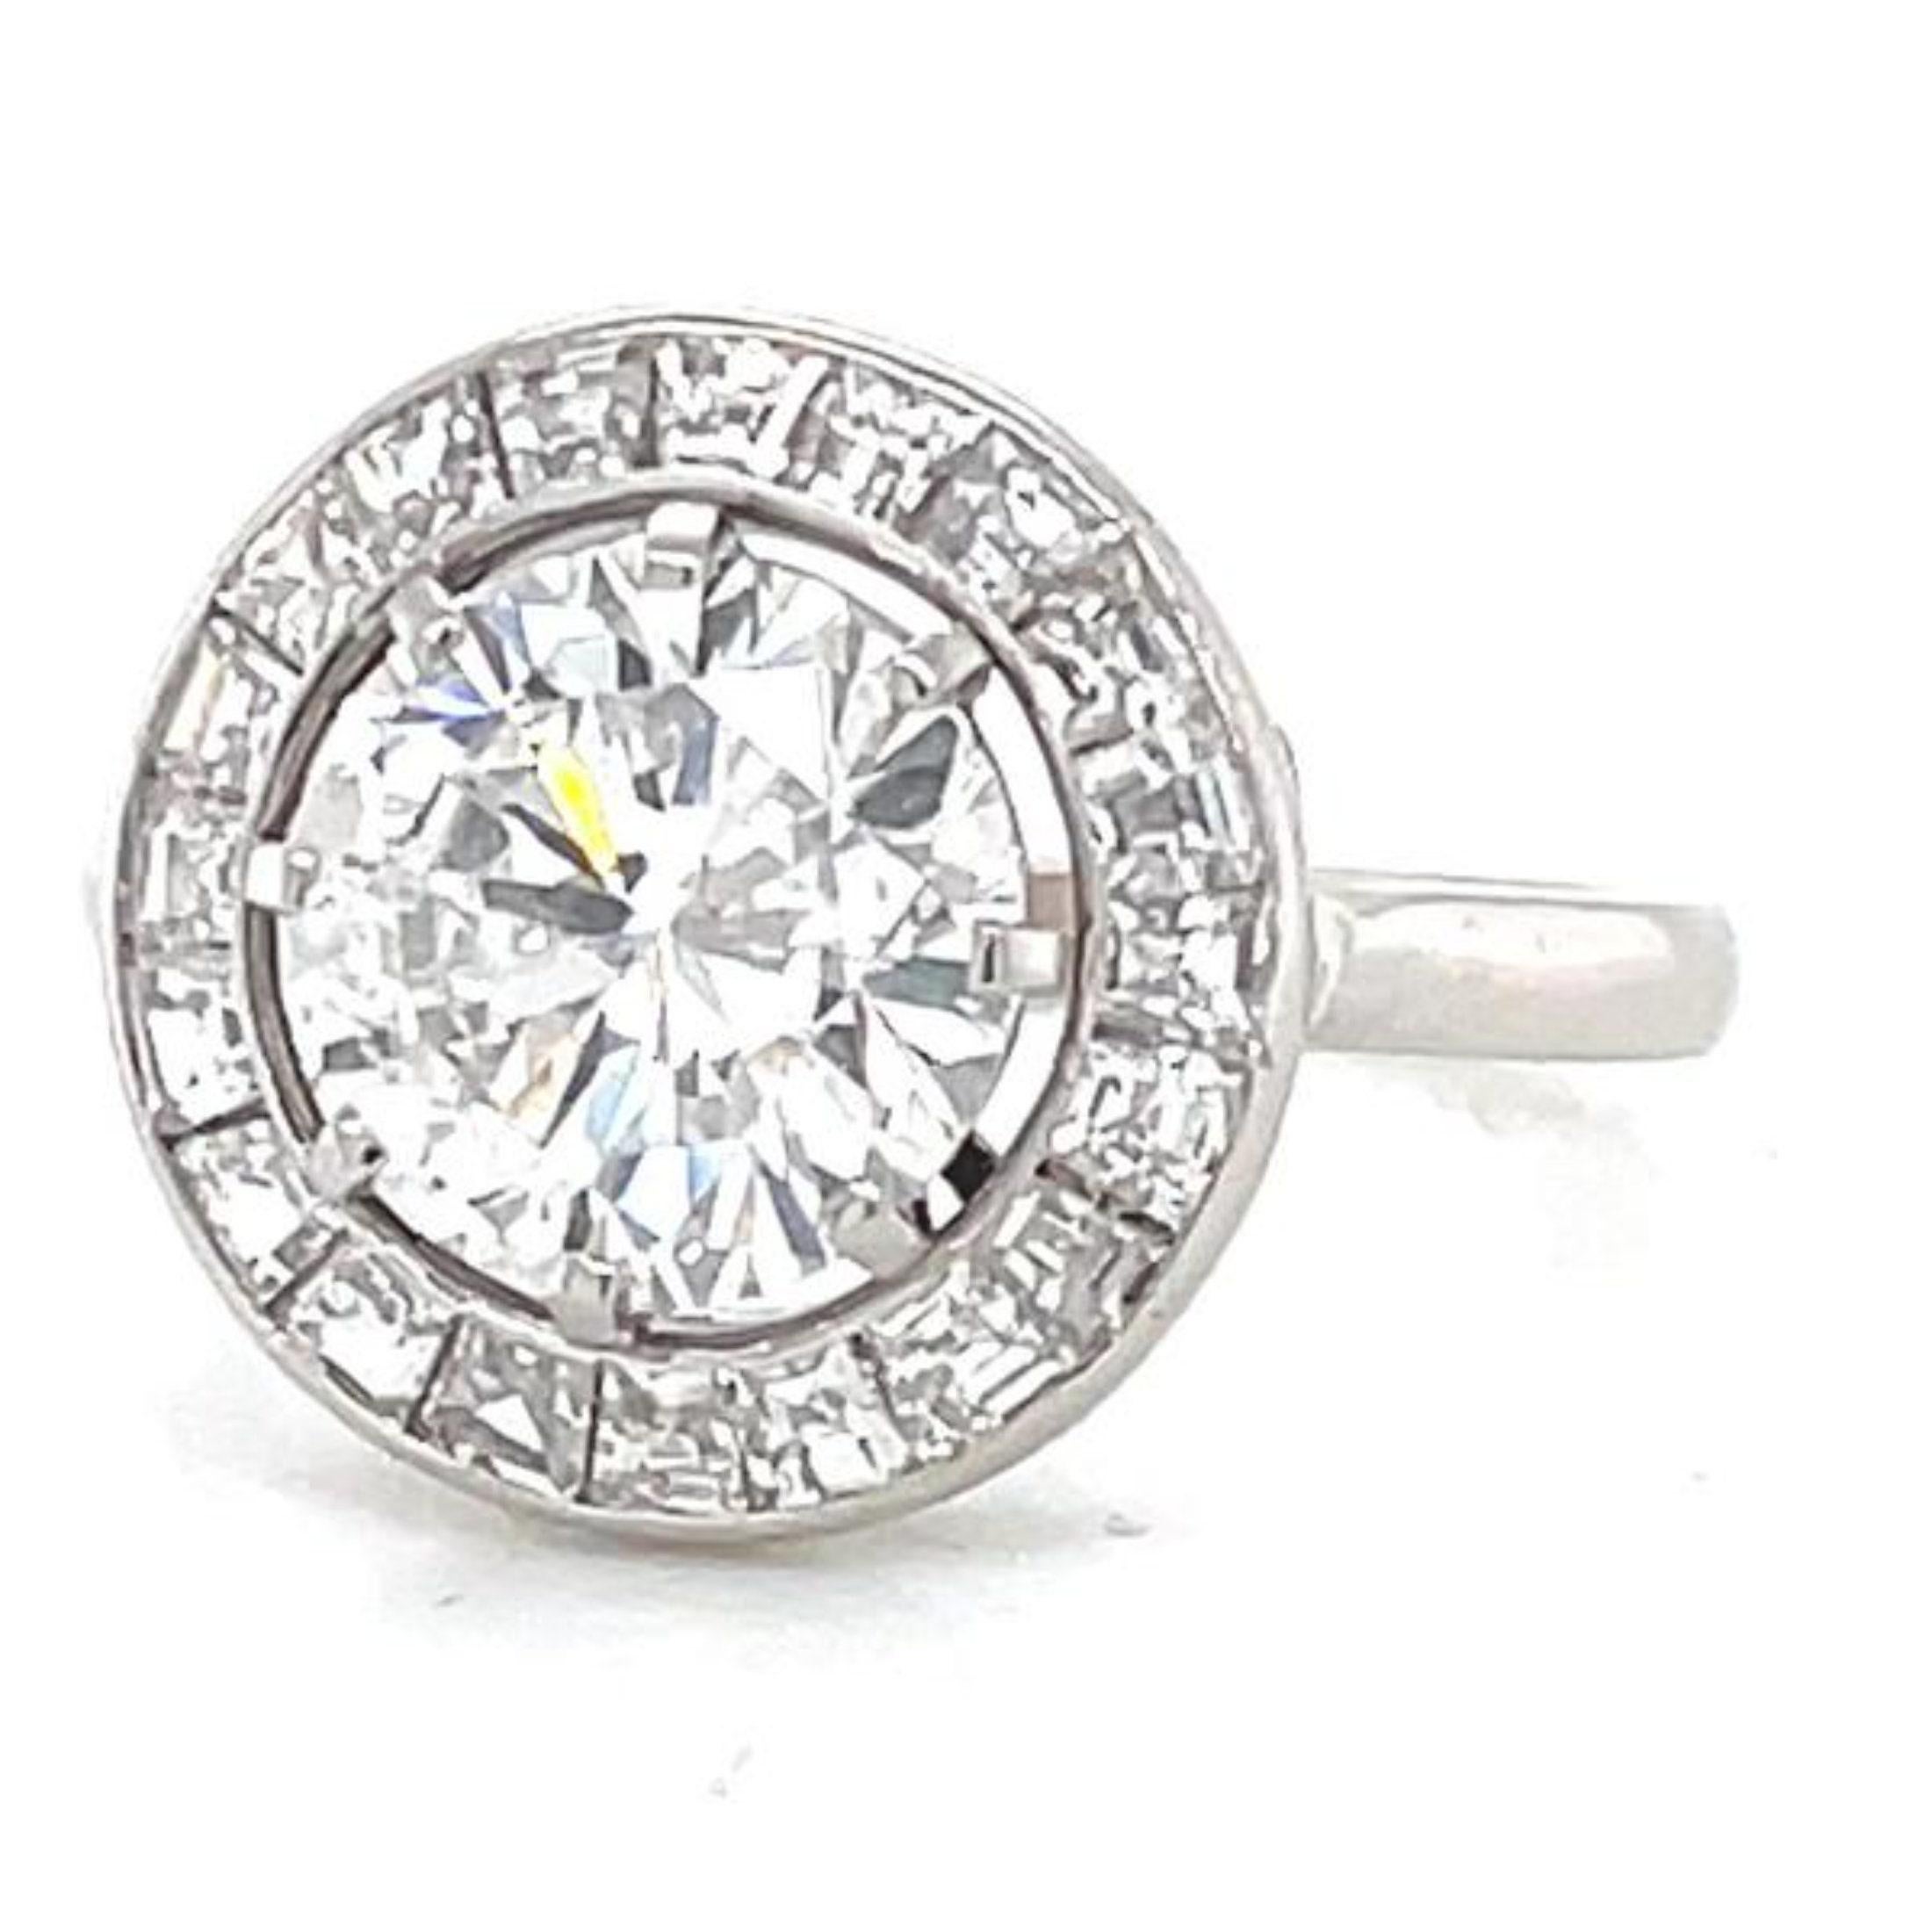 For Sale:  2 Carat Halo Solitaire Diamond Engagement Rings Bridal Diamond White Gold Ring 5